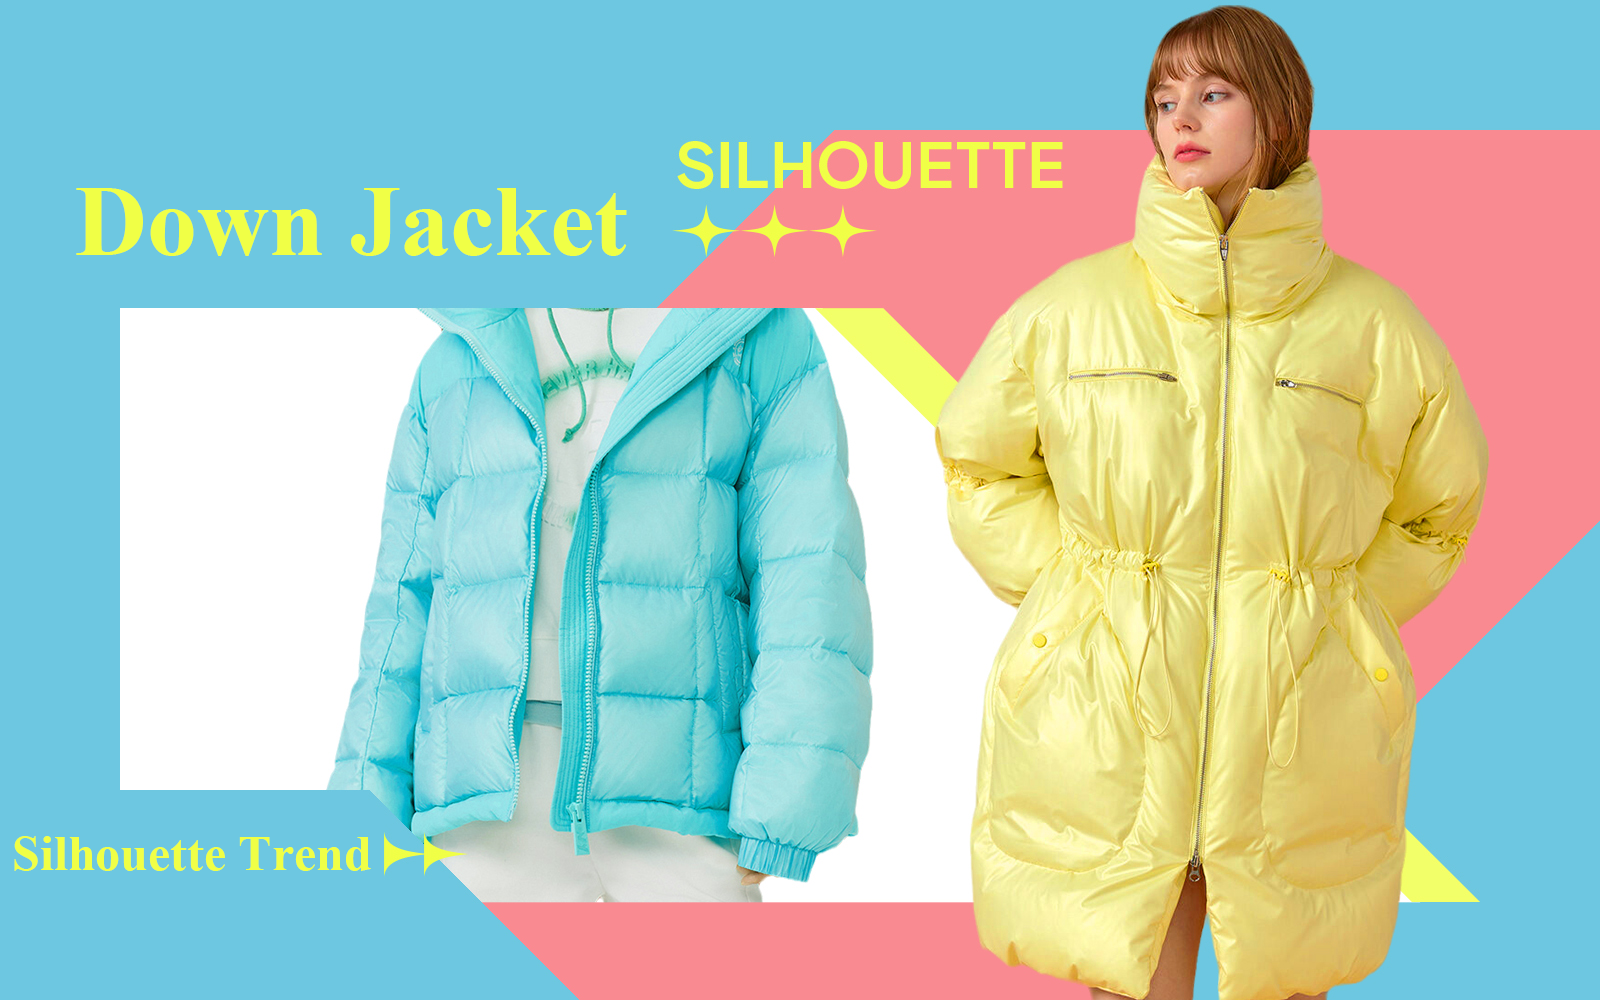 Inclusive Volume -- The Silhouette Trend for Women's Down Jacket